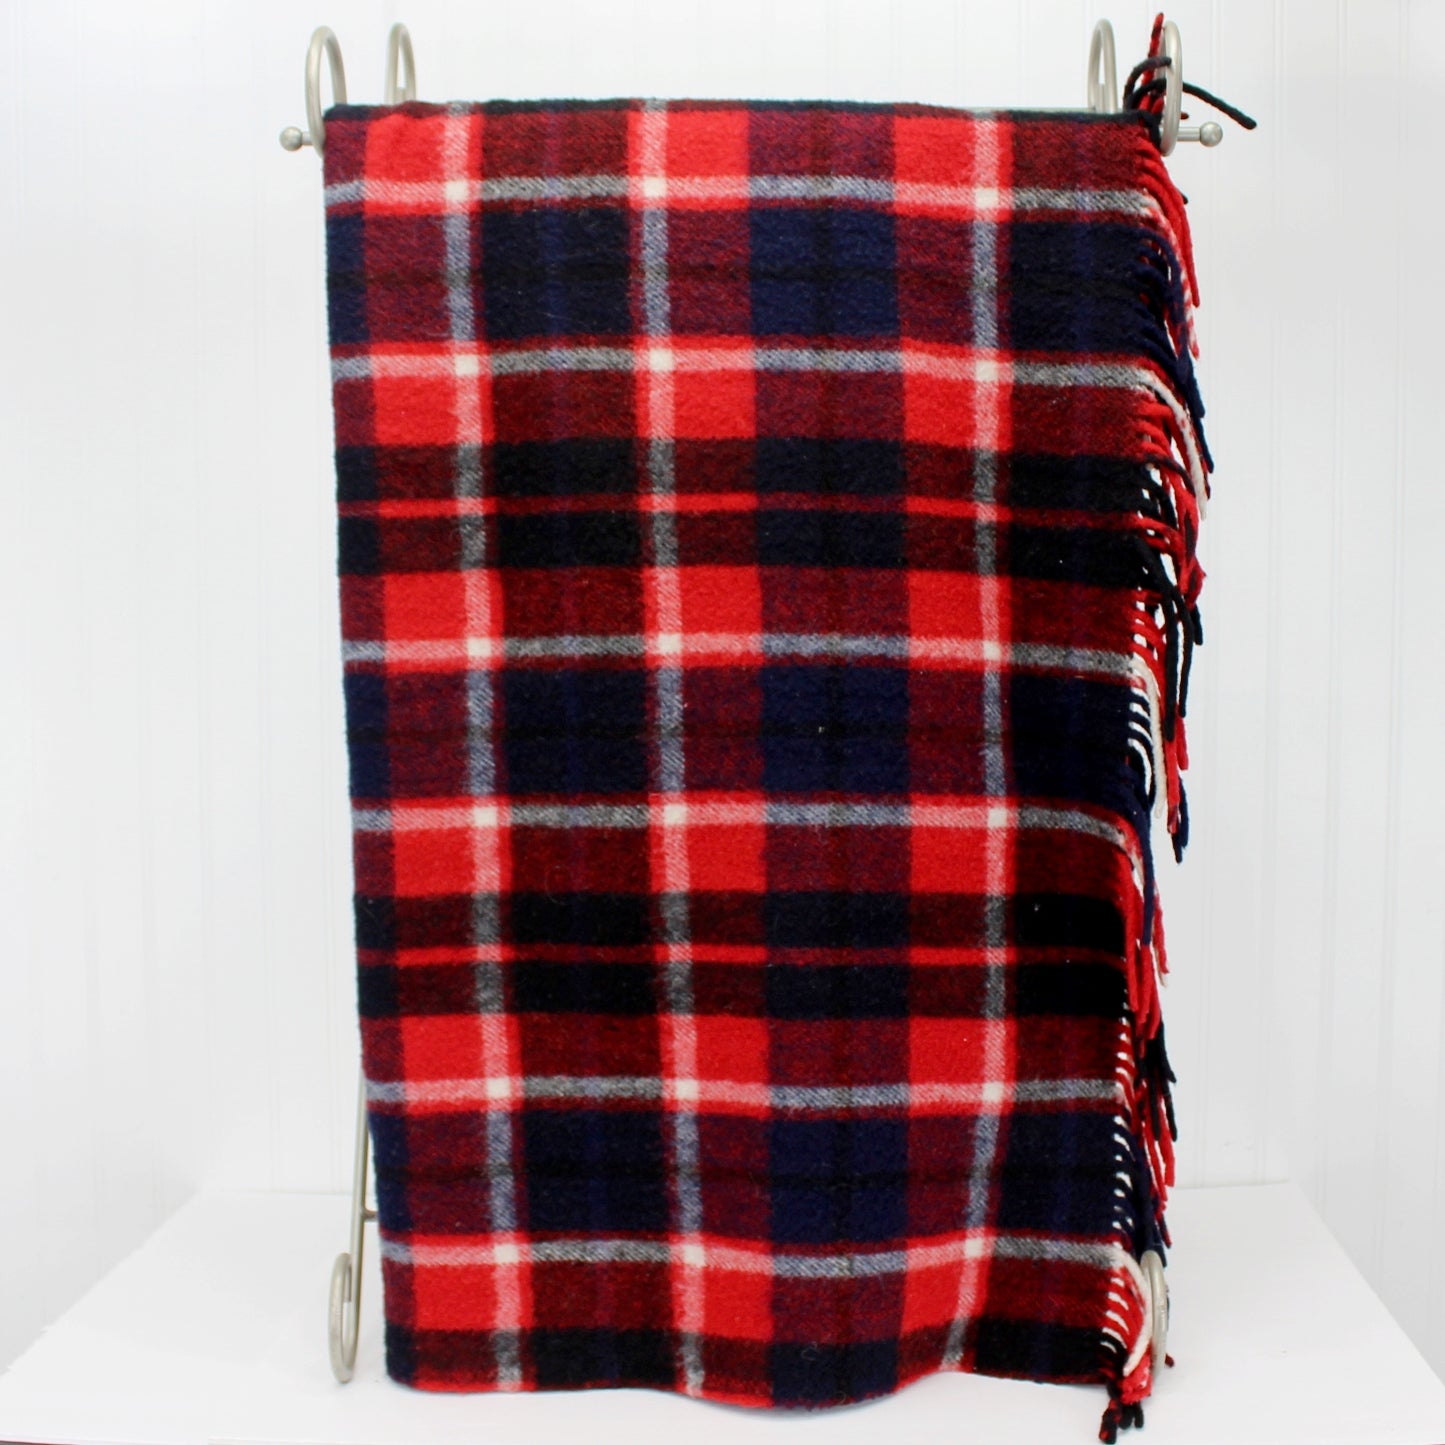 Bellavista Oveja Wool Throw Blanket Red White Blue Black Plaid 56" X 65" 2 Available matching pair sold separately